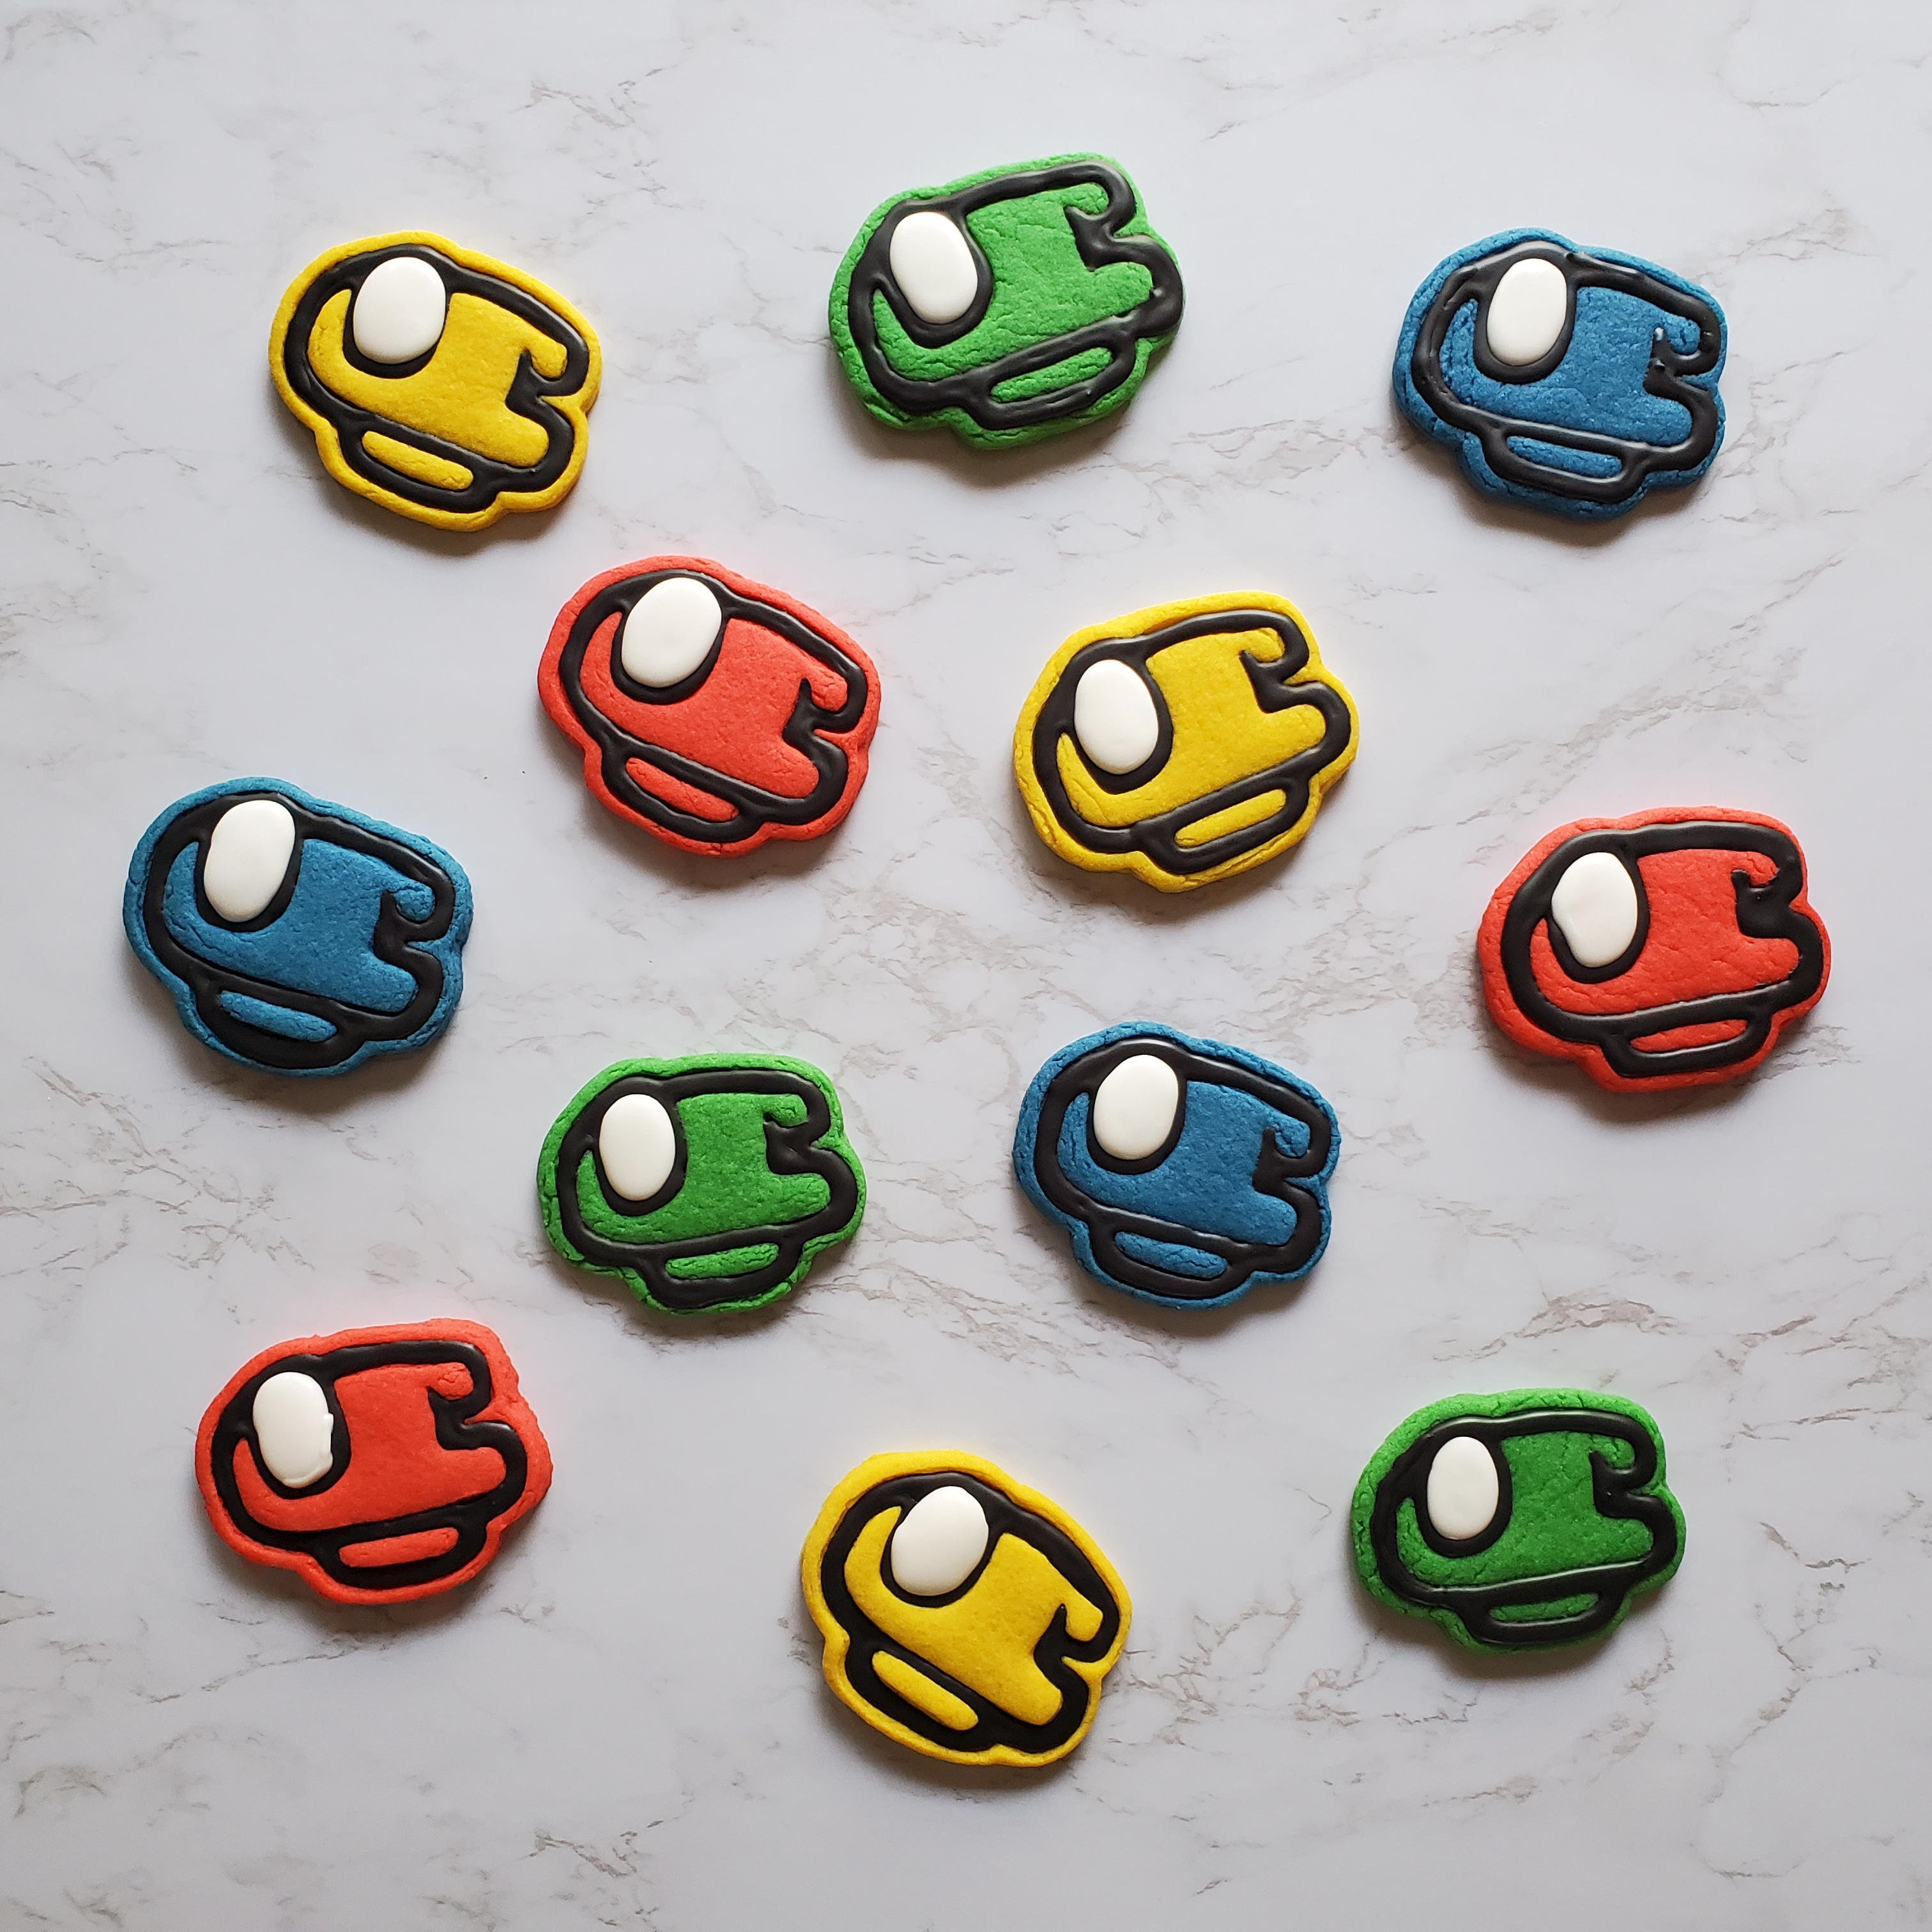 Among us cookies in the colors red, yellow, green and blue, laying on a marble countertop.